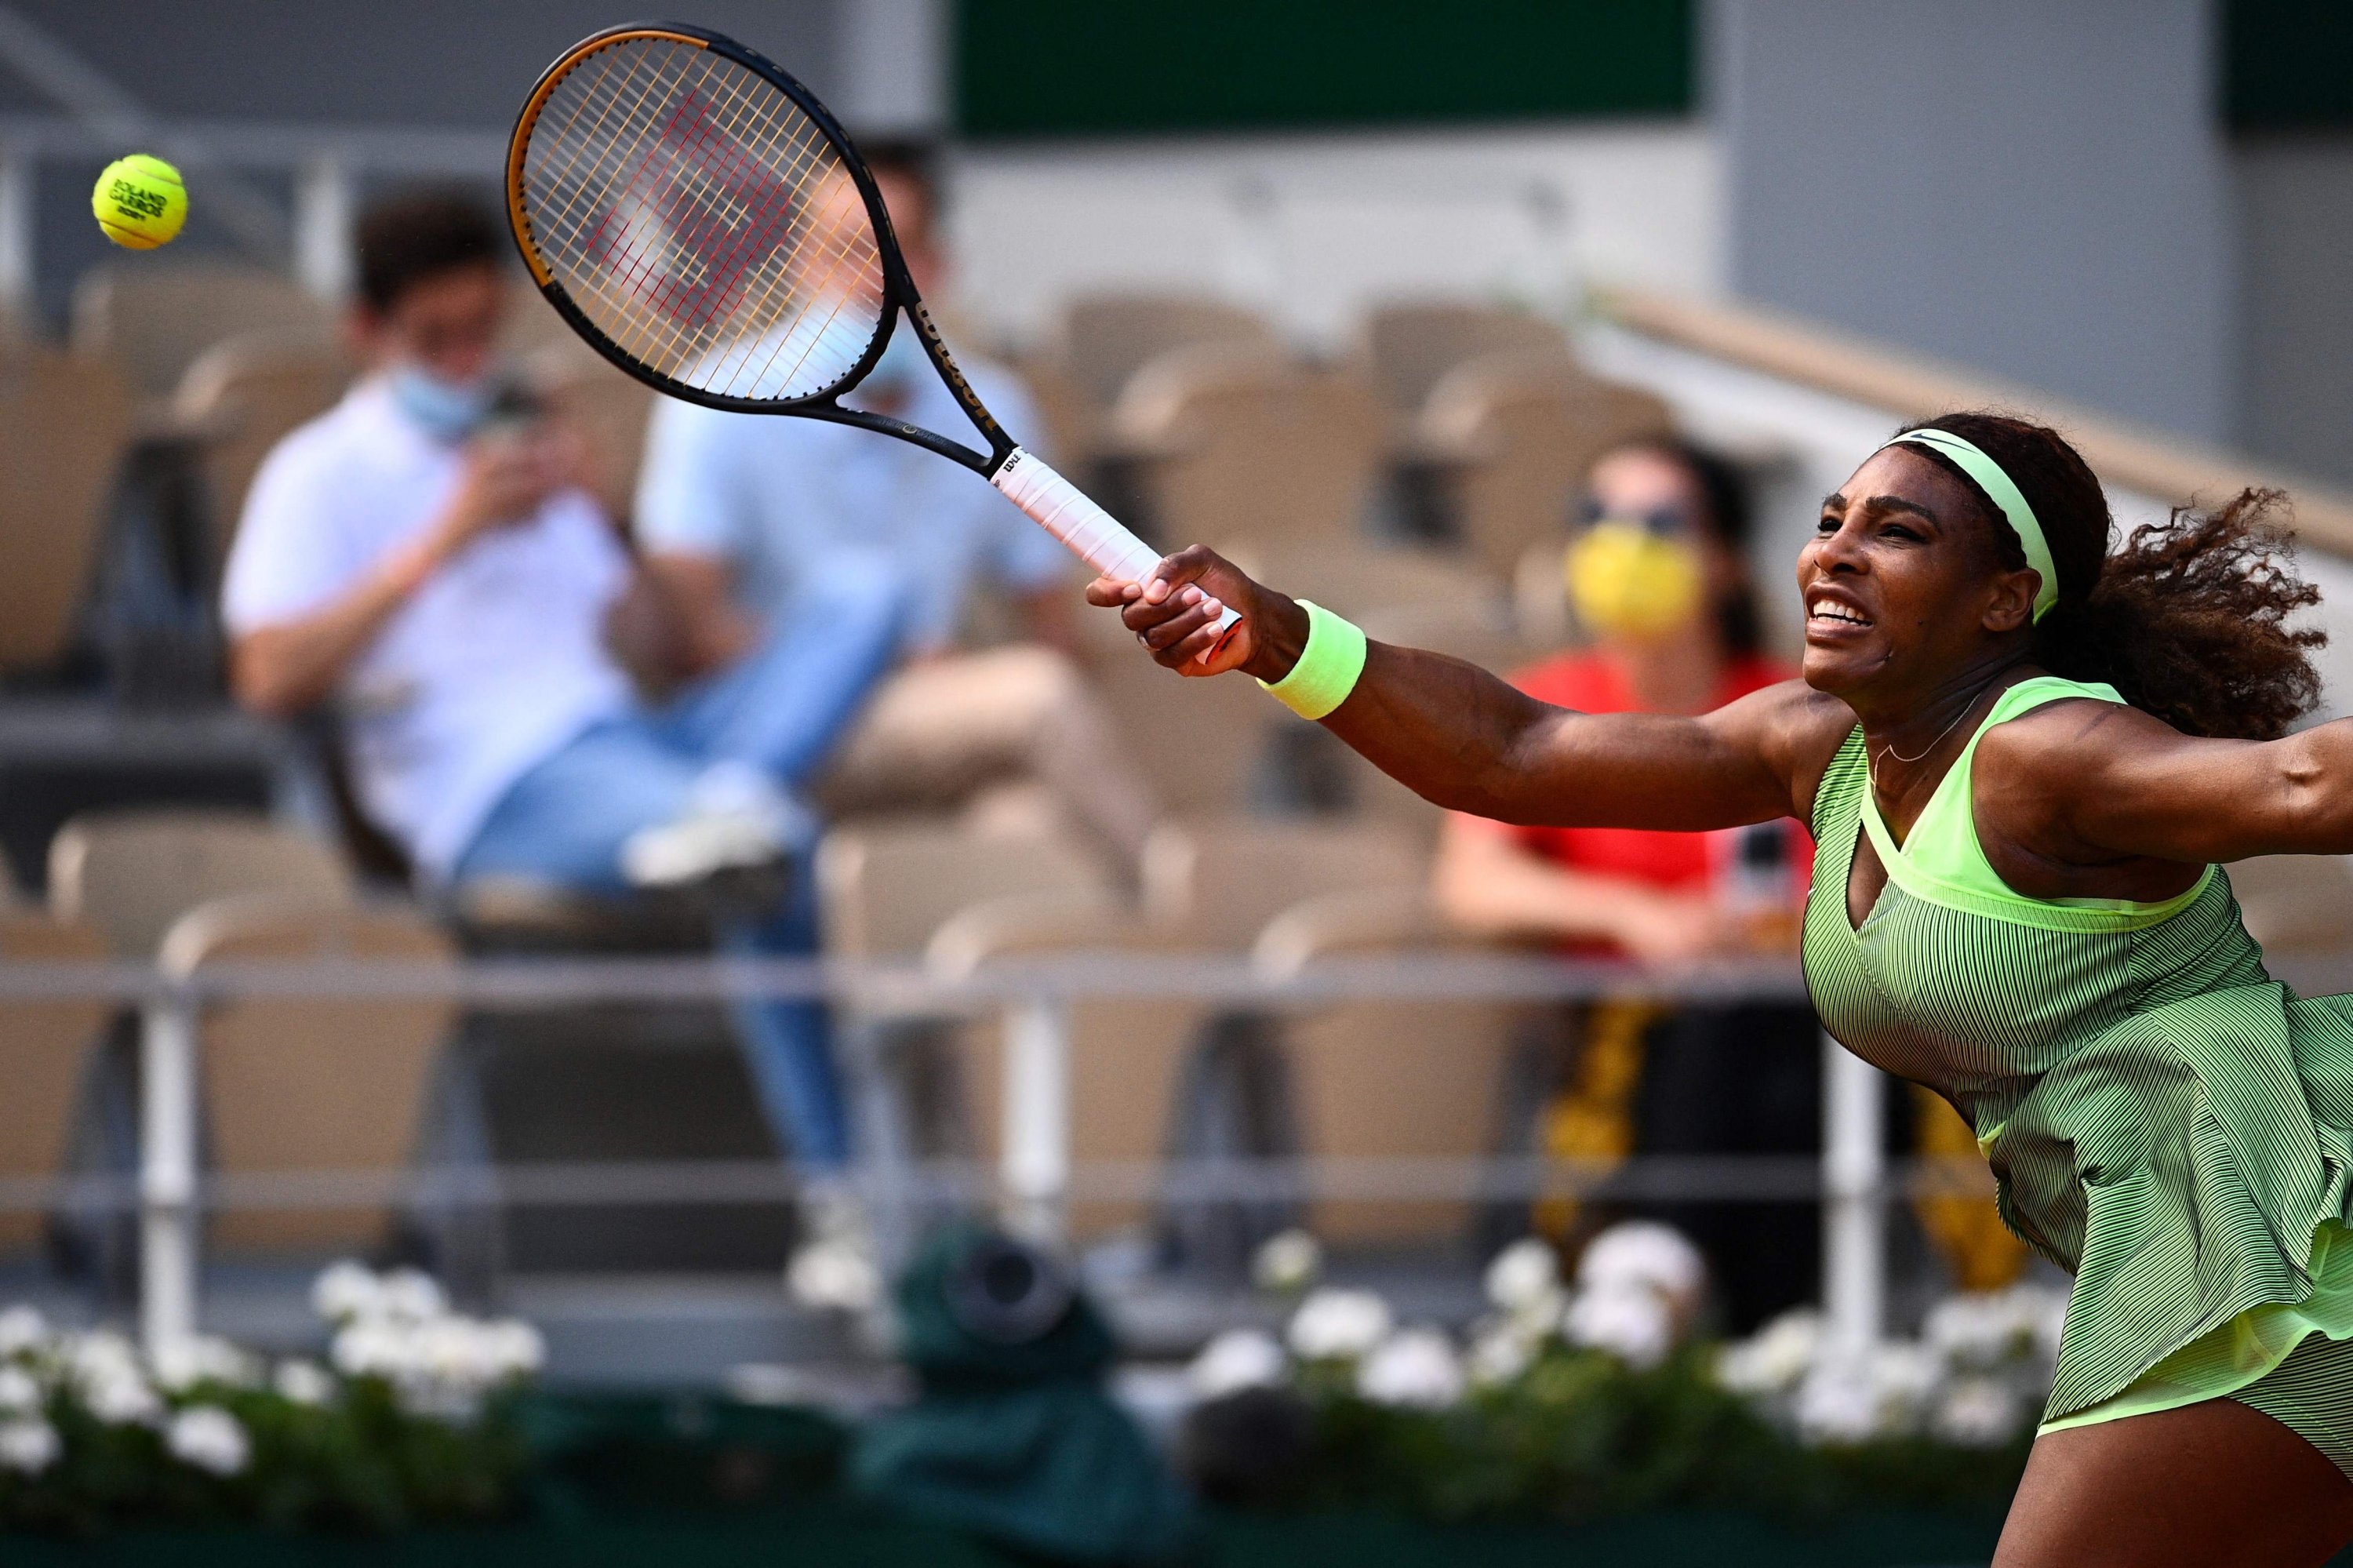 Serena Williams of the U.S. returns the ball to Kazakhstan's Elena Rybakina during their women's singles fourth round tennis match on Day 8 of The Roland Garros 2021 French Open tennis tournament in Paris, June 6, 2021. (AFP Photo)